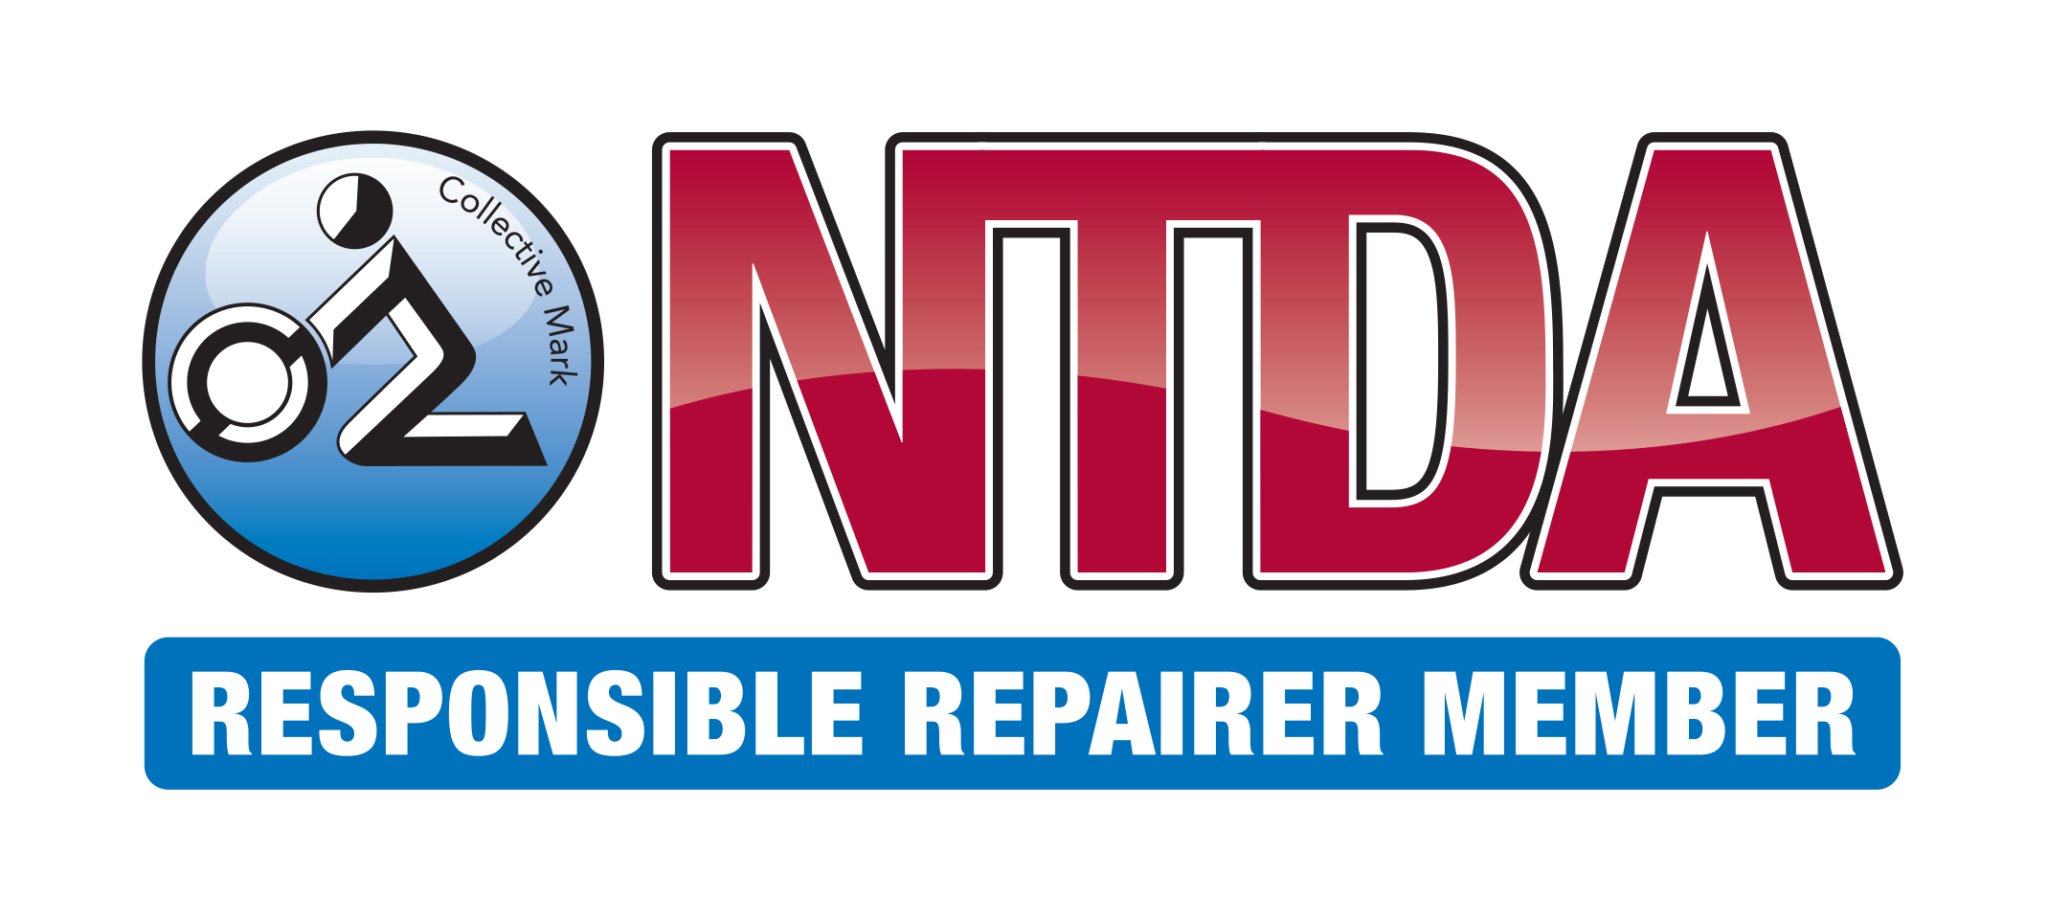 Responsible Repairer Group attracts new members to NTDA